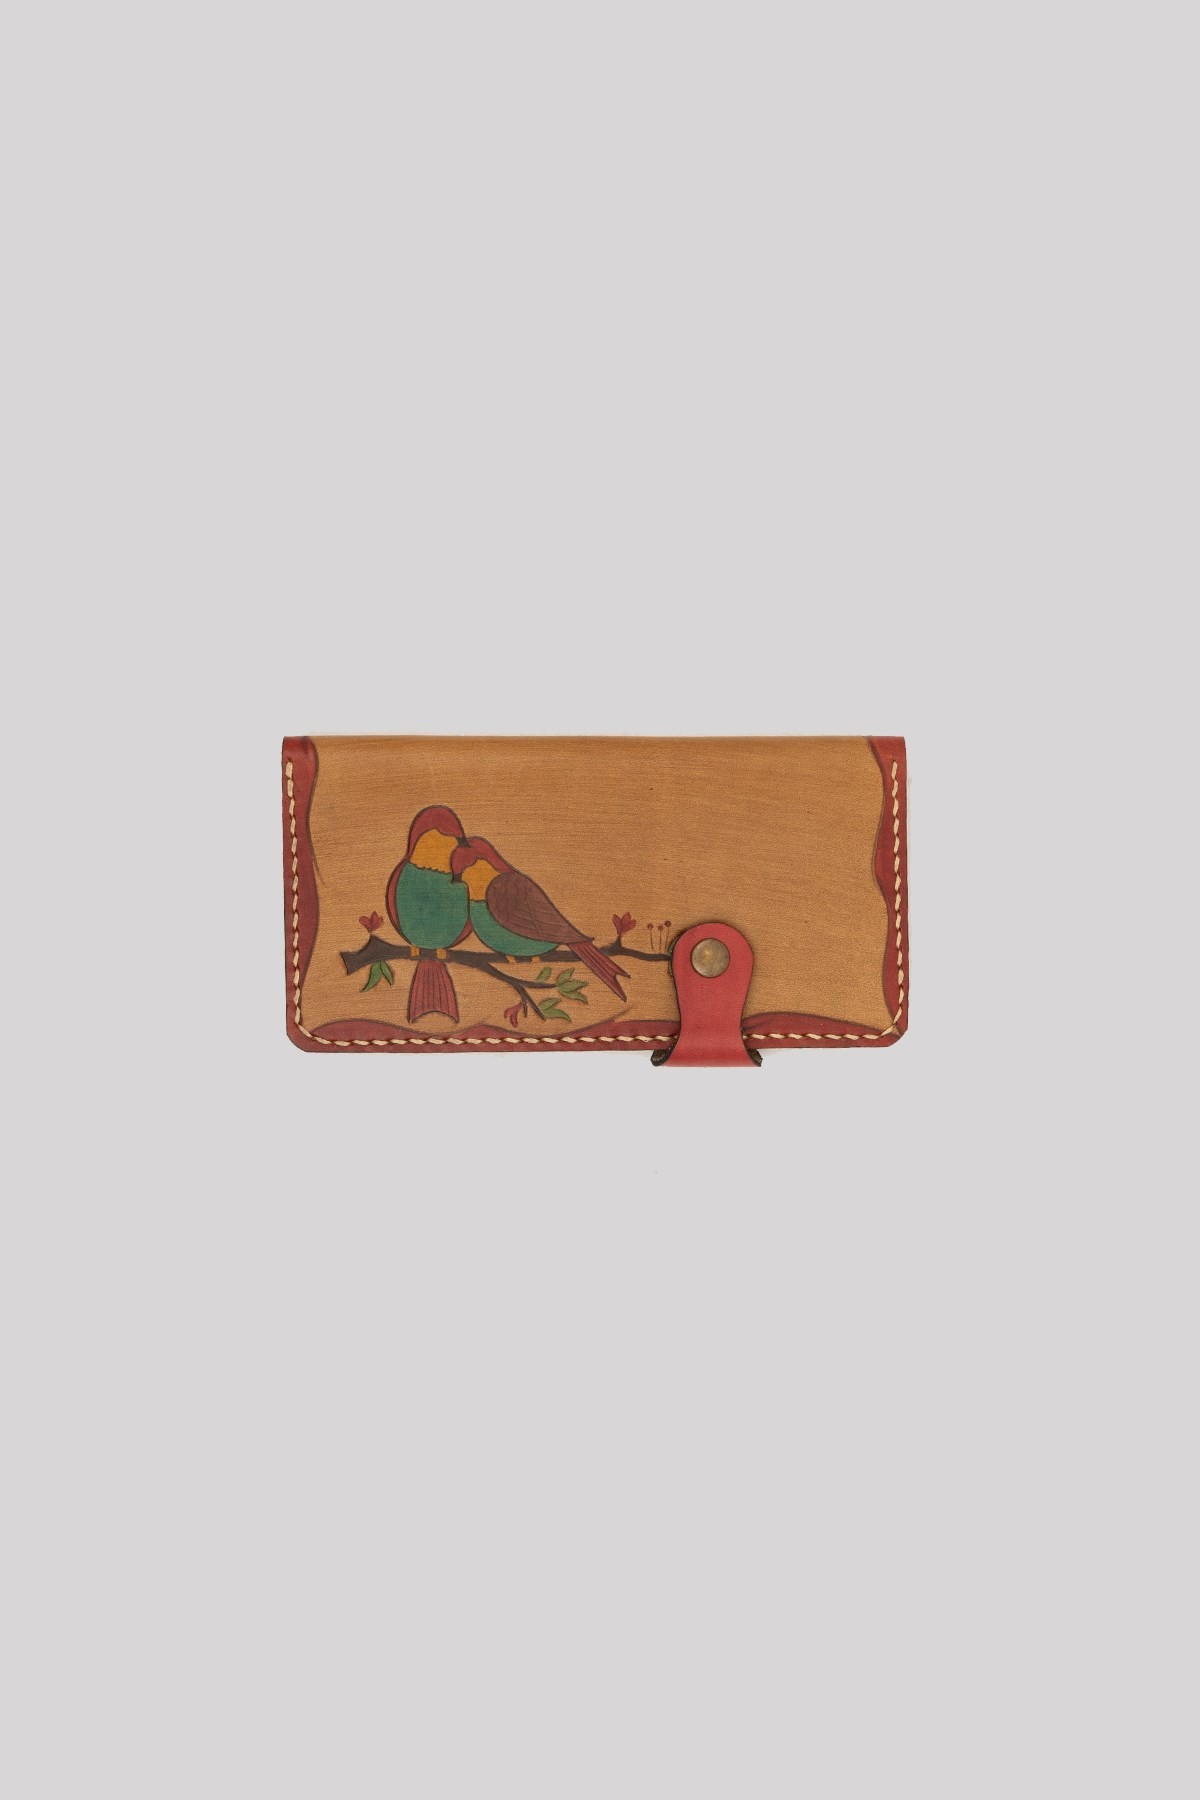 HANDMADE BIRD PATTERNED WOMAN LEATHER WALLET - BROWN